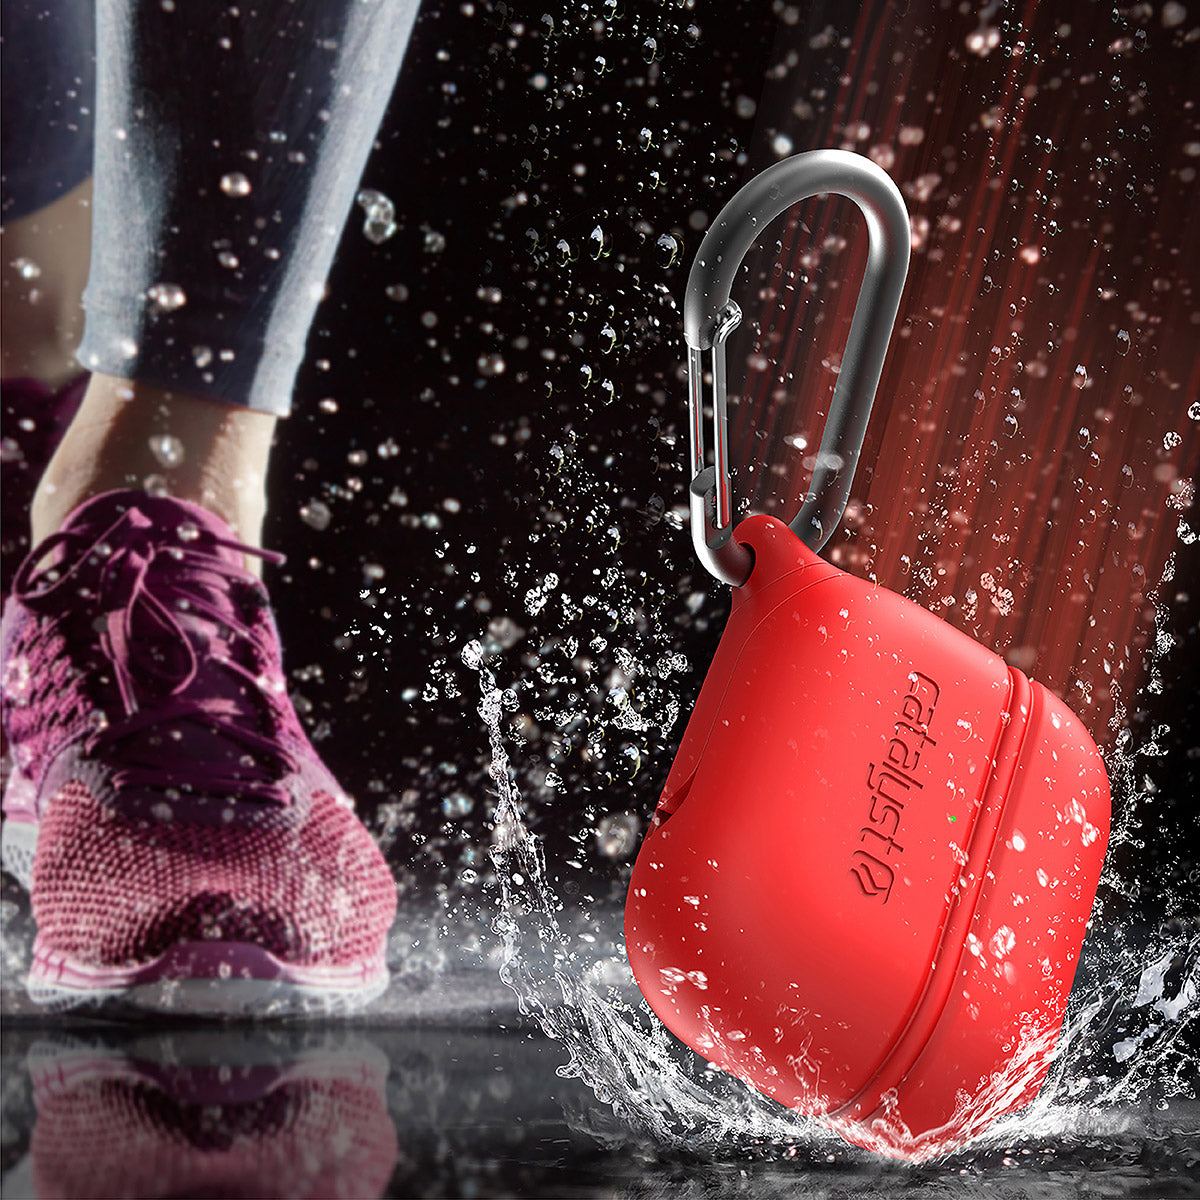 CATAPLAPDPRORED | catalyst airpods pro gen 2 1 waterproof case carabiner special edition red dropped and splashes of water running shoes